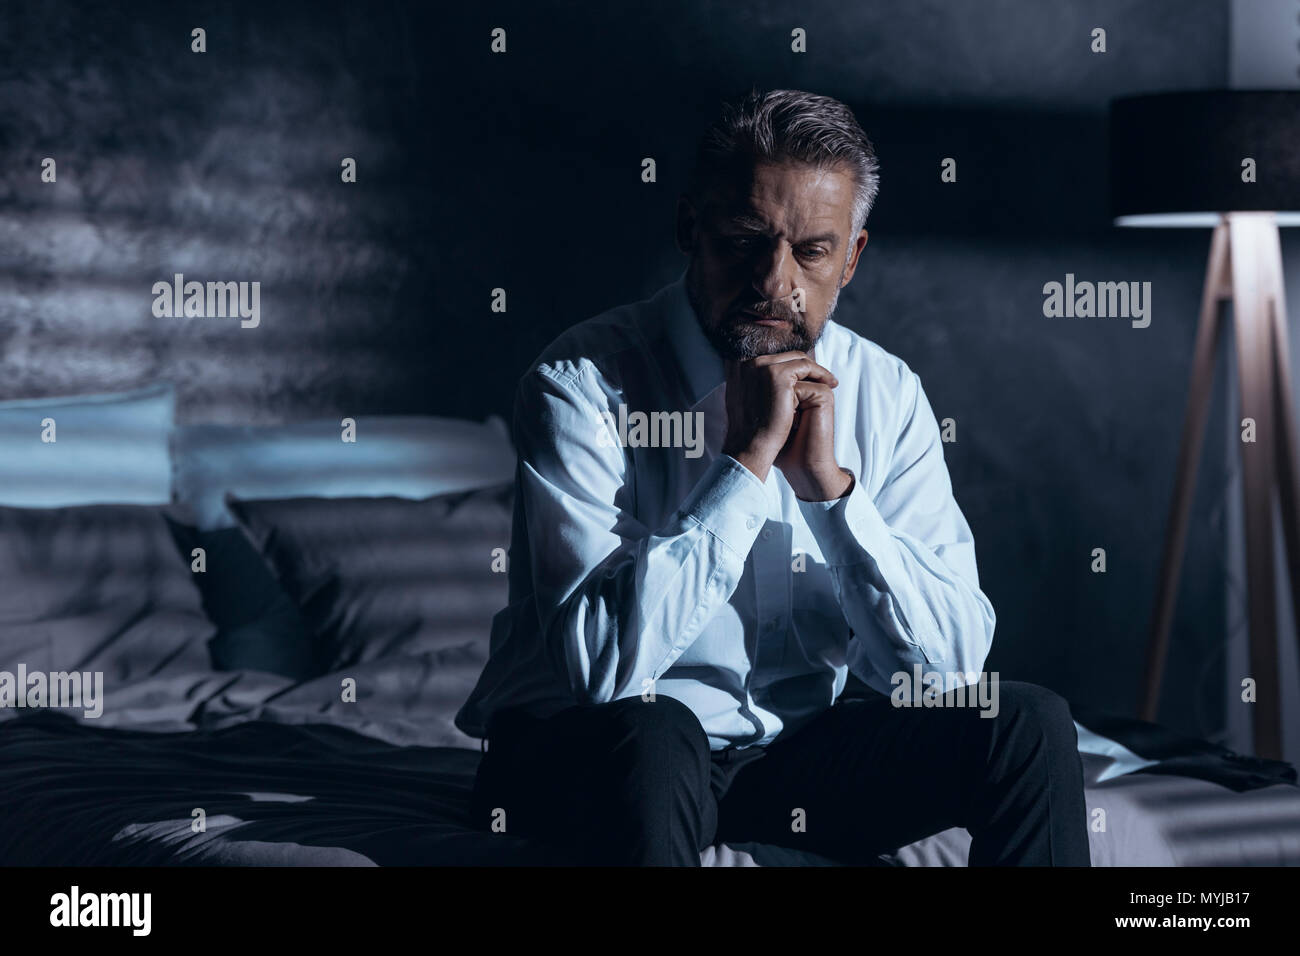 Stressed and depressed man sitting alone in the dark with a problem Stock Photo